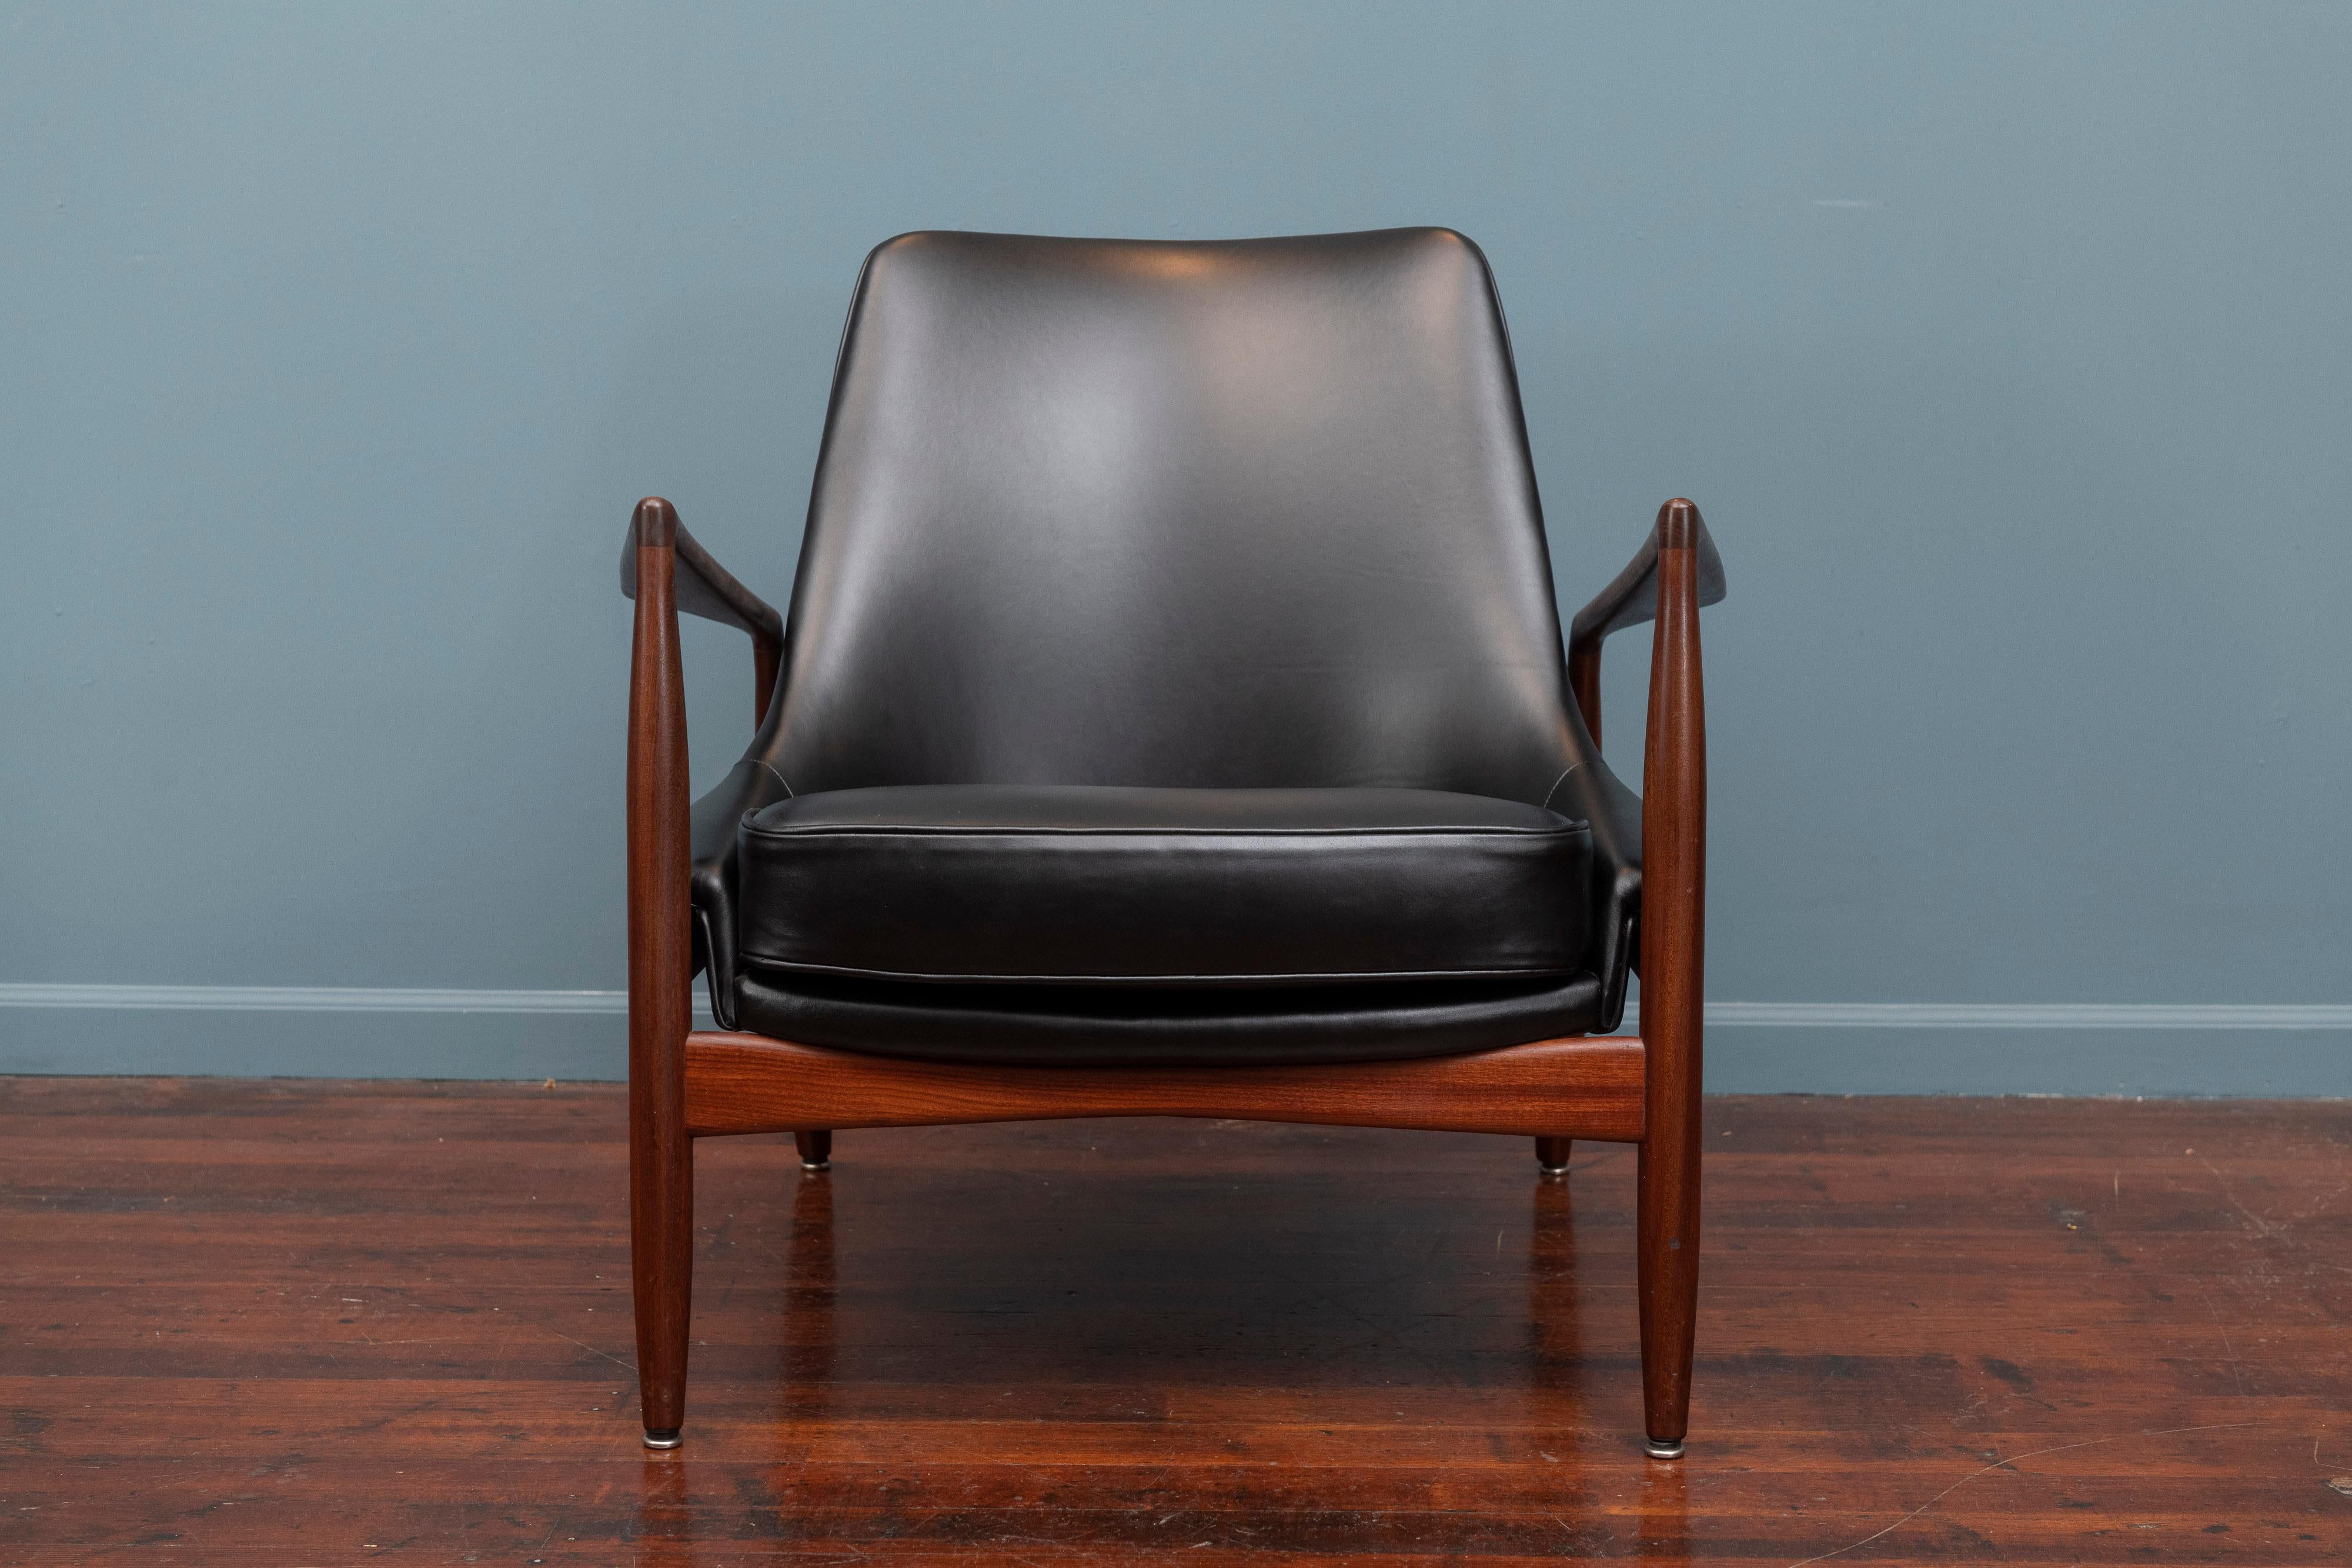 Ib Kofod-Larsen design seal chair for OPE, Denmark. Excellent original finish teak frame newly upholstered in Italian black leather, ready to enjoy.